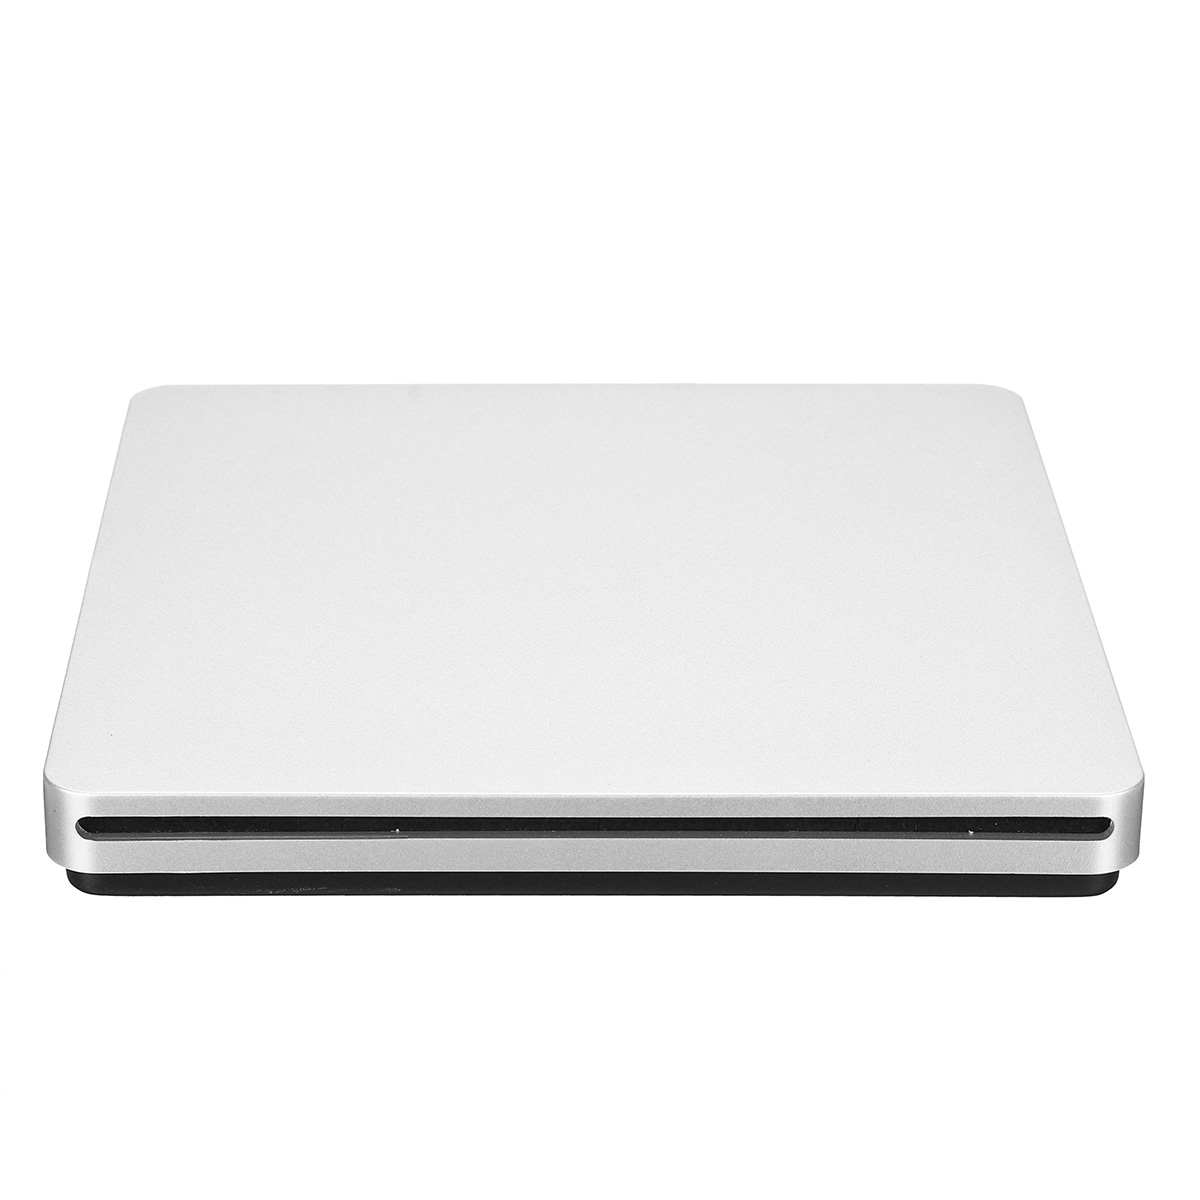 Portable-USB-30-Silver-External-DVD-RW-Max24X-High-speed-Data-Transmission-for-Win-XP-Win-7-Win-8-Wi-1701692-6